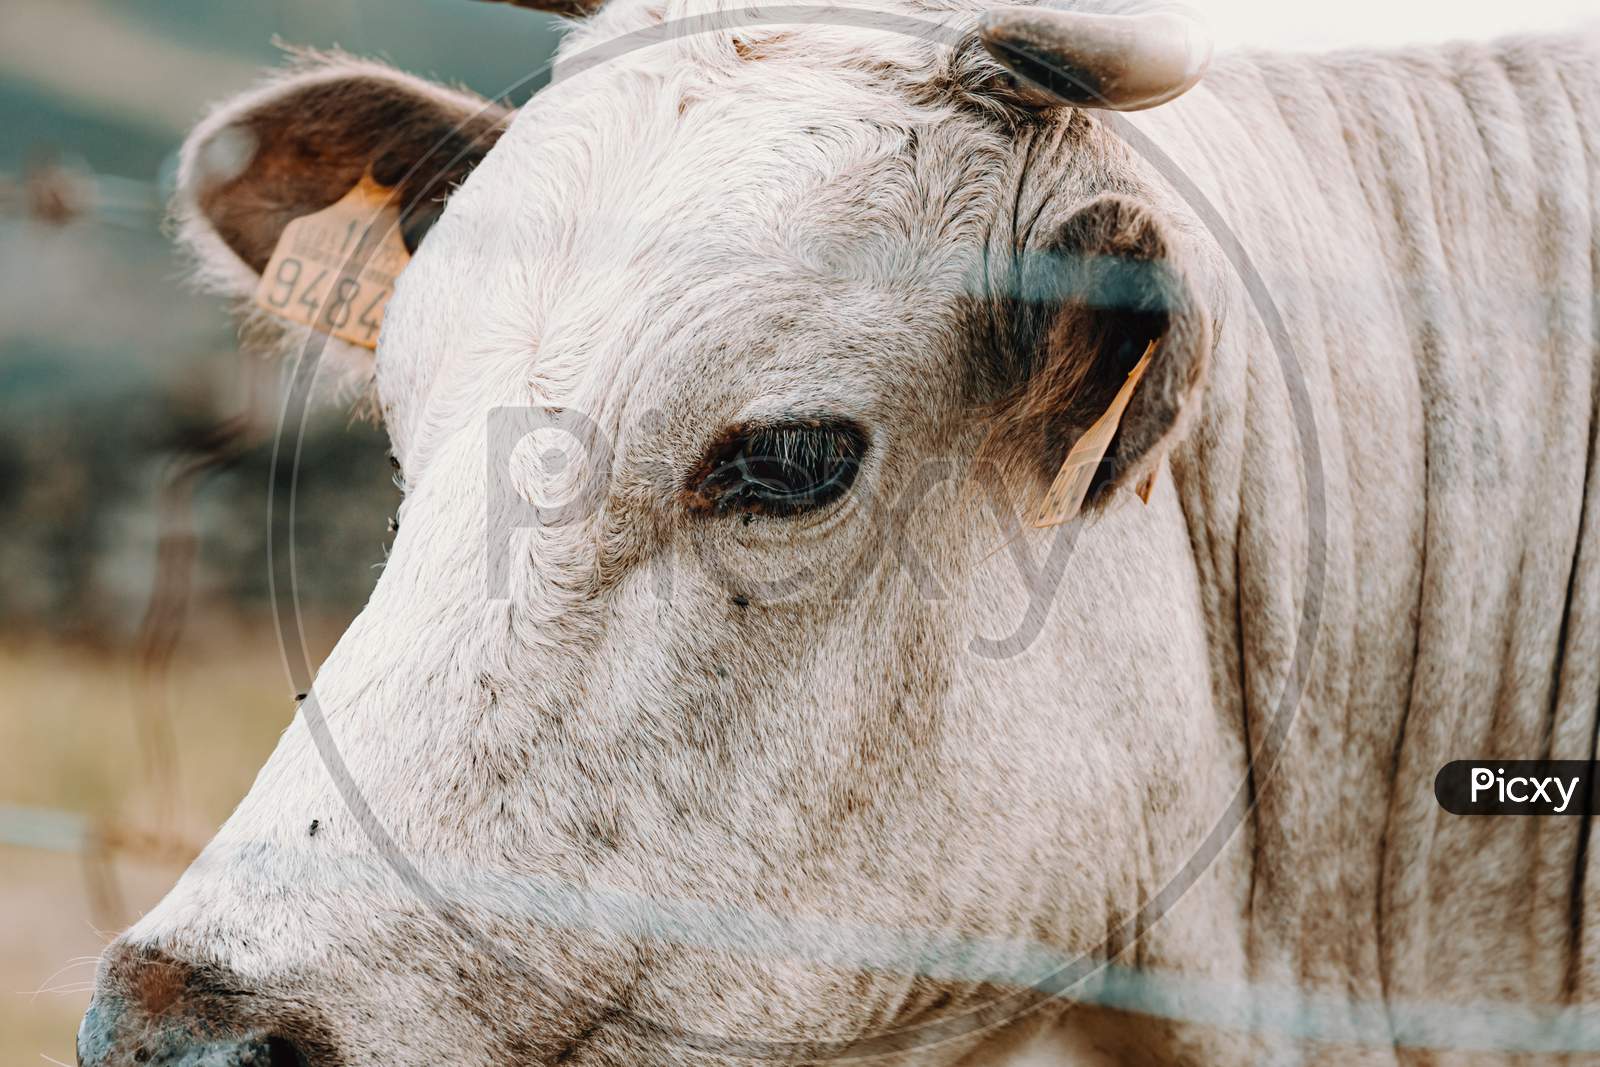 Super Close Up Image Of The Face Of A White Cow With Giant Horns